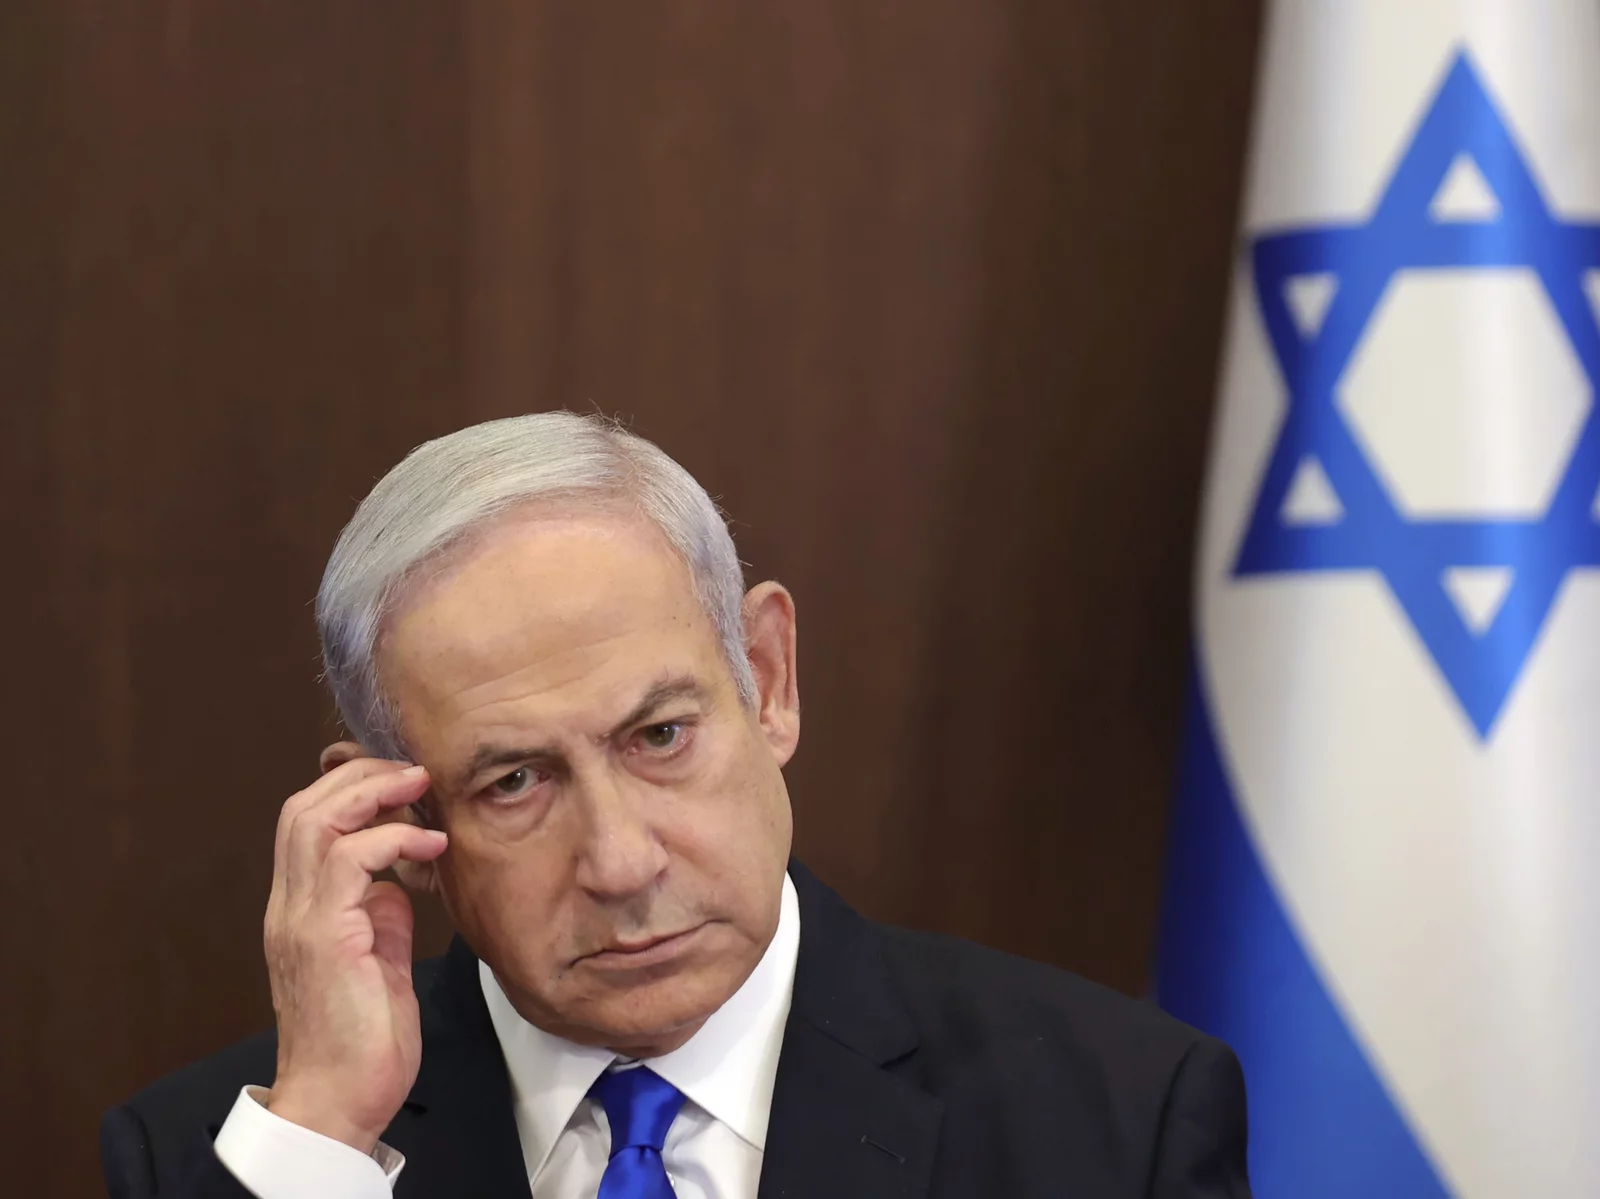 Thank God, I feel very good,  Israel's Netanyahu responds after being rushed to a hospital for what  his office says was dehydration